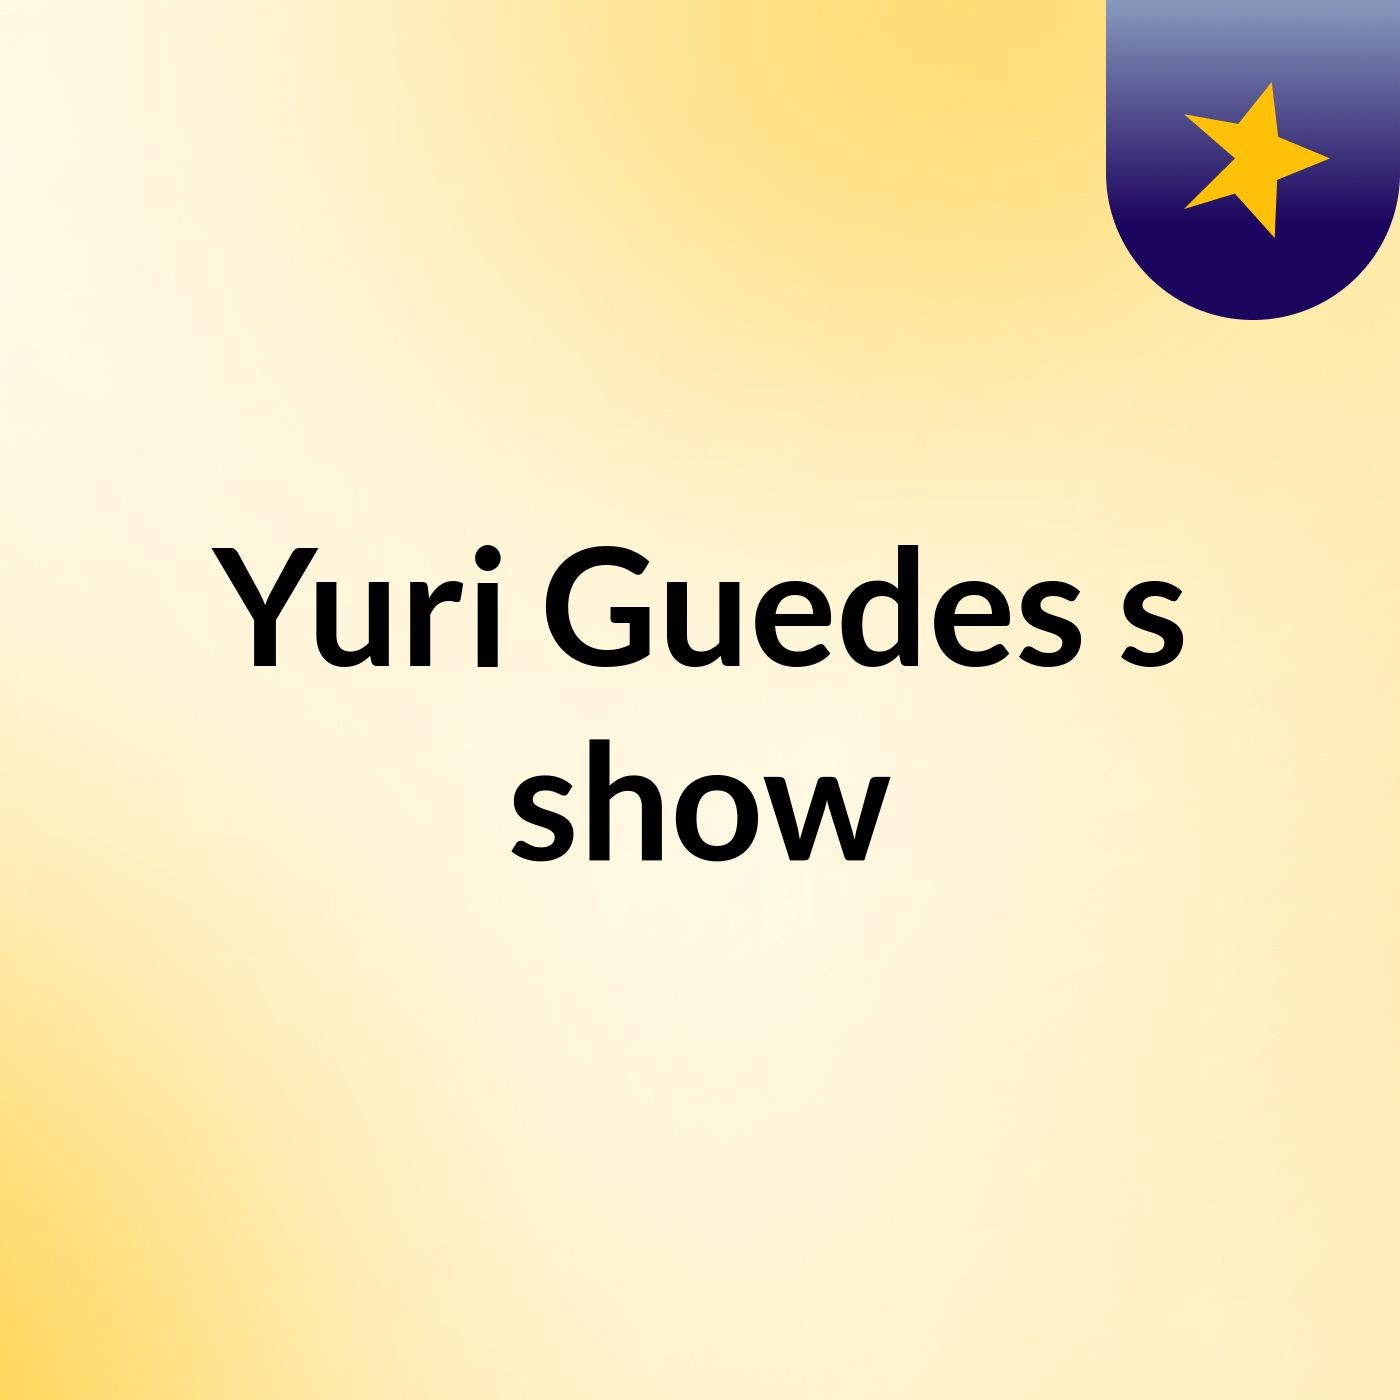 Yuri Guedes's show